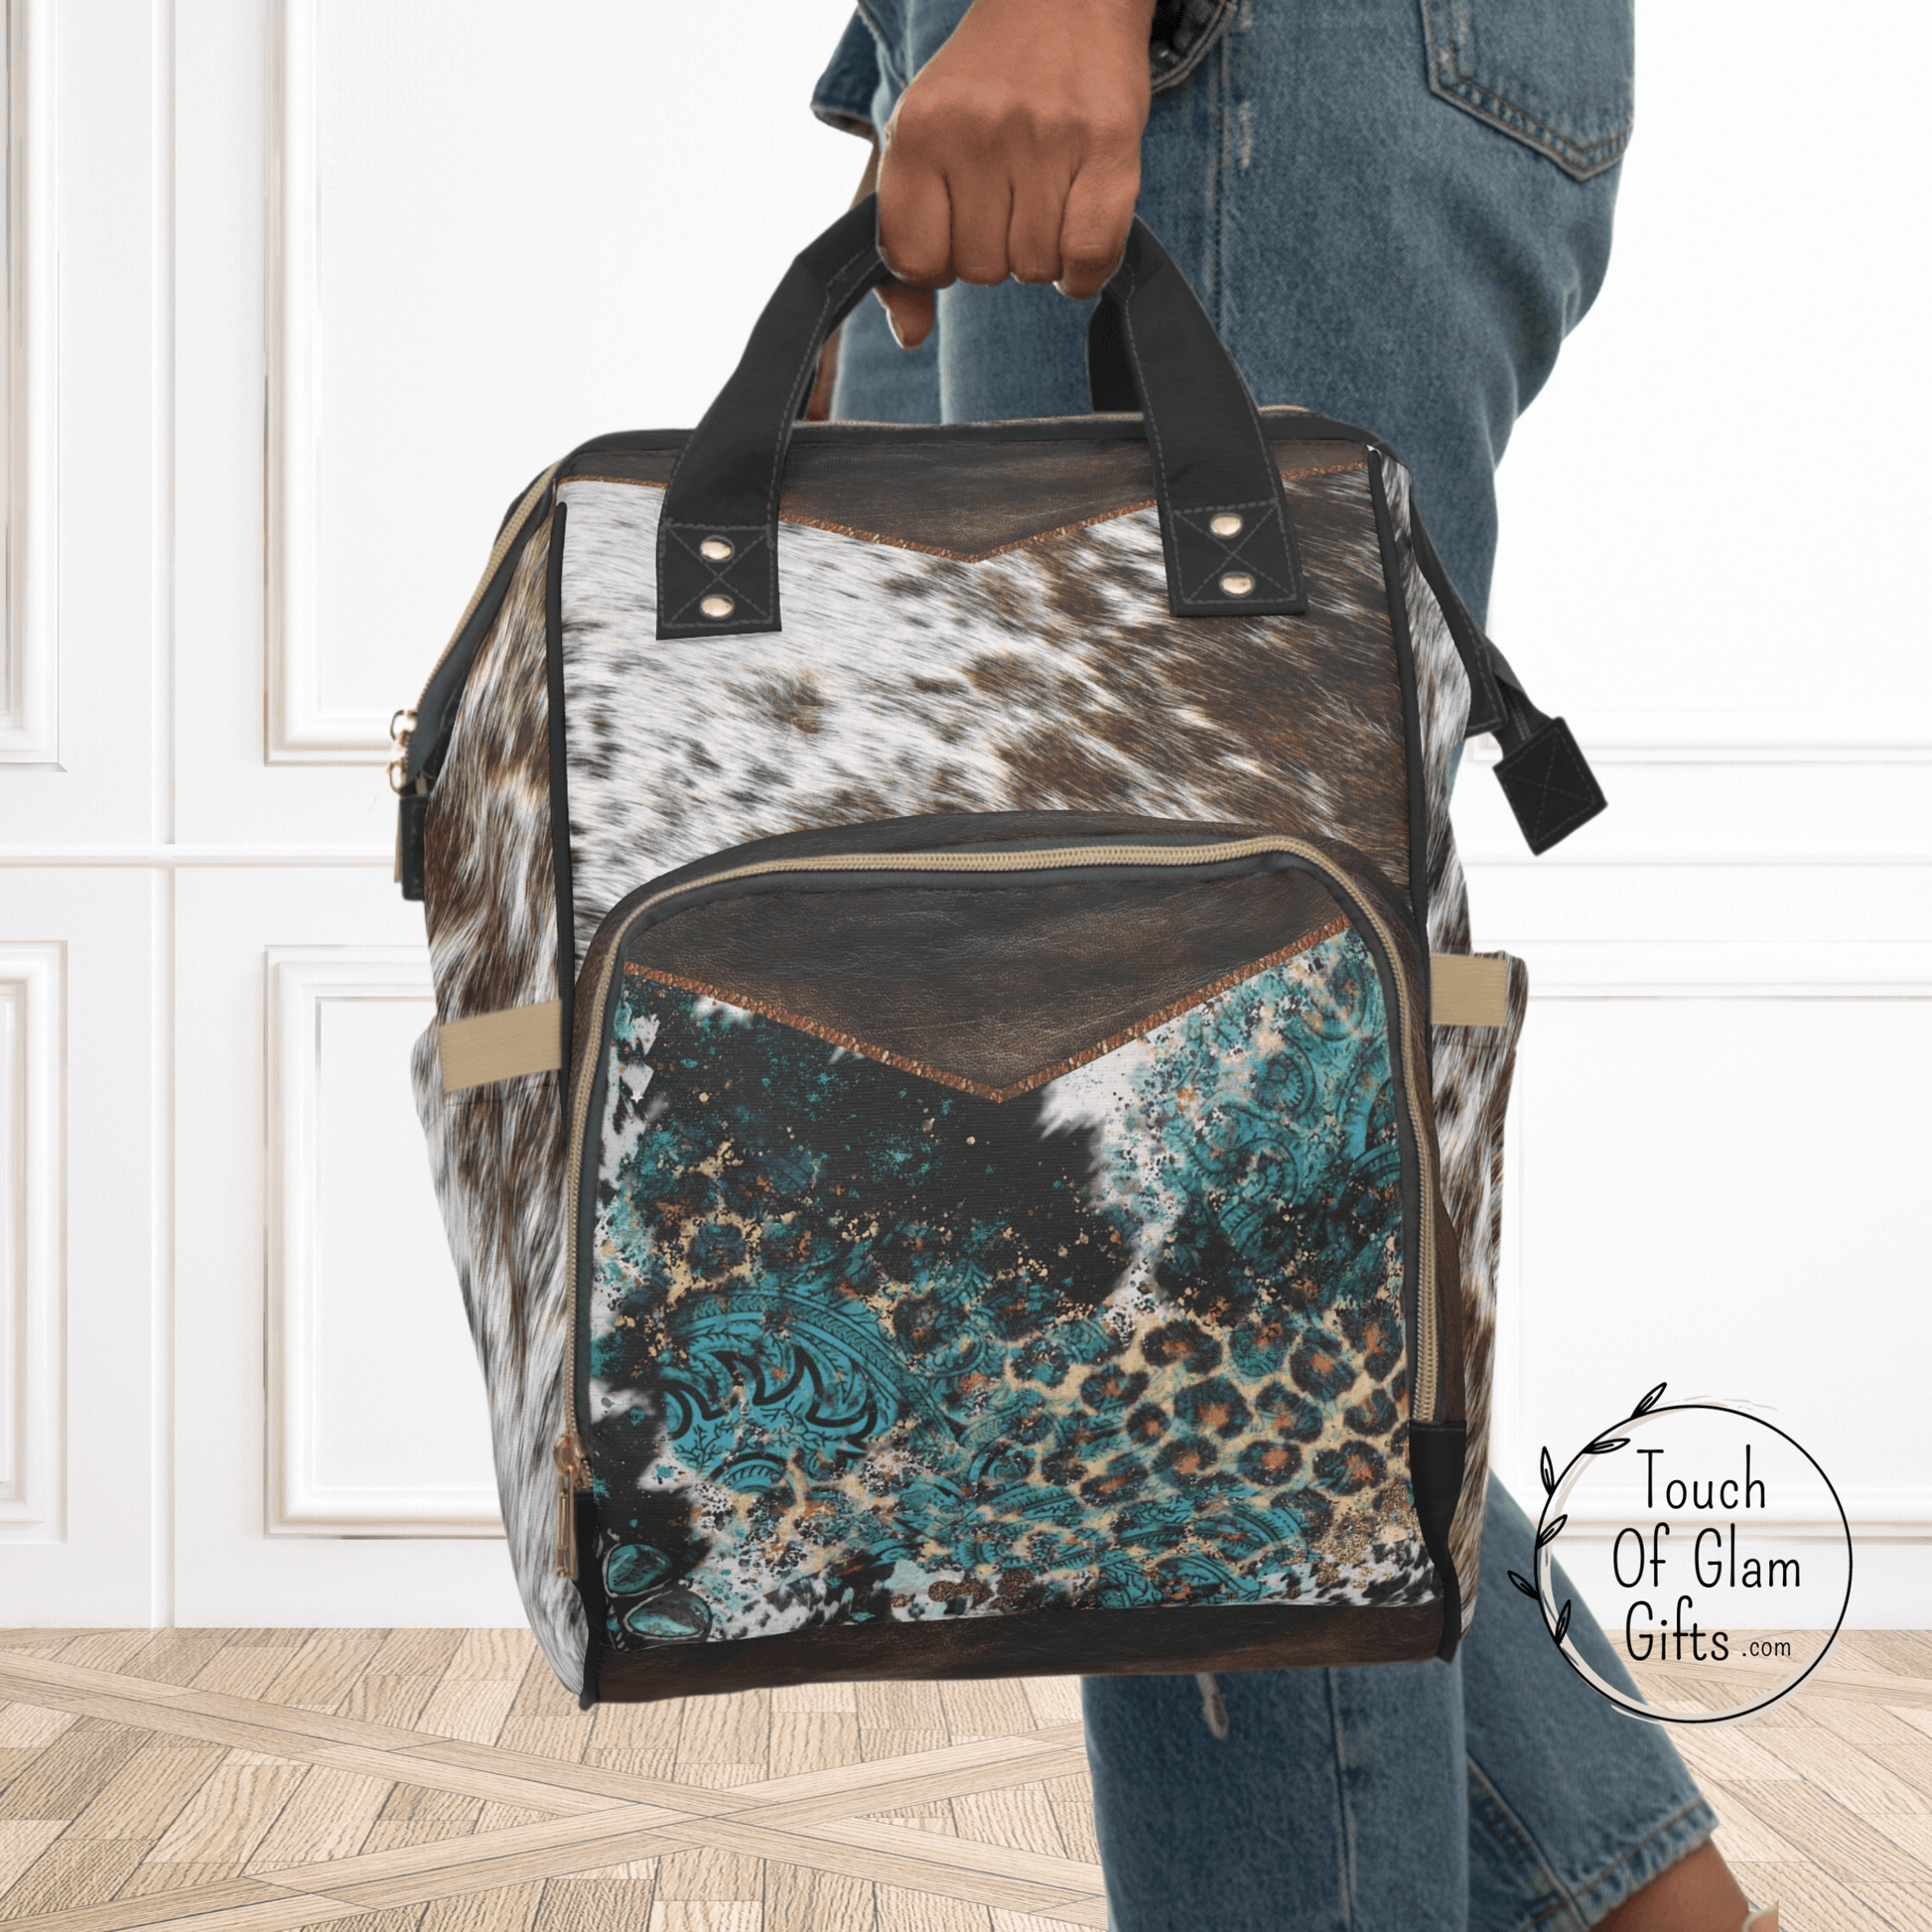 Our western diaper bag backpack makes the perfect baby shower gift for new moms. This timeless cowhide print on durable nylon fabric makes it cleanable too. the front pocket has a touch of turquoise and more animal prints for a trendy travel bag.